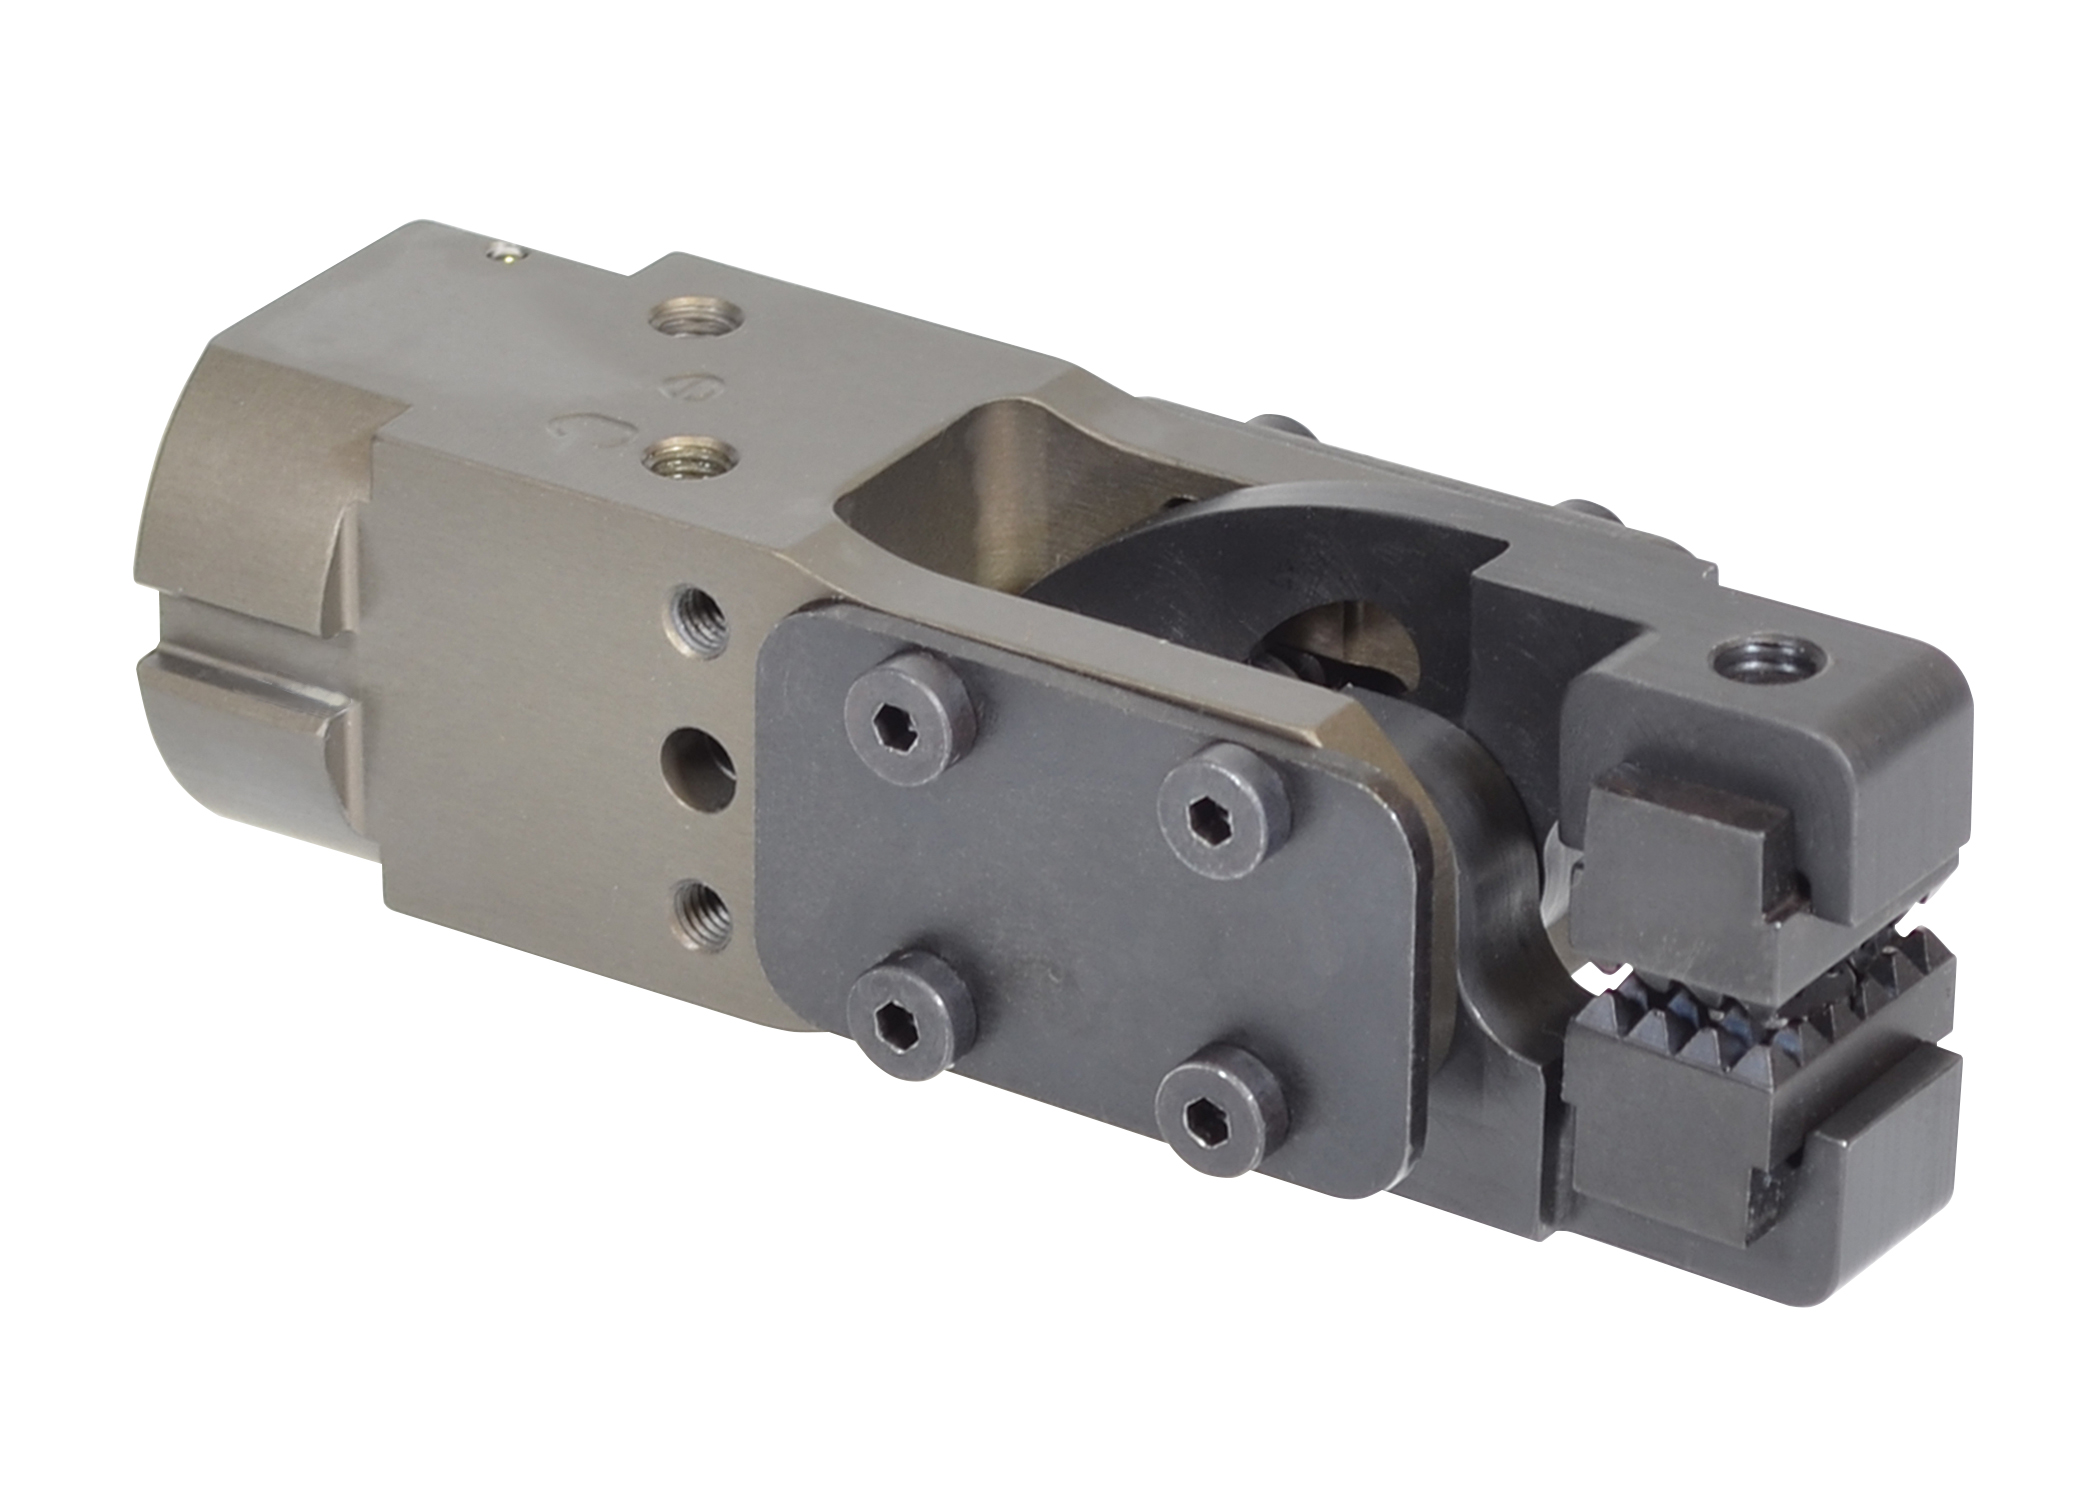 PHD Releases Series GRM0 Miniature Workholding Clamps!